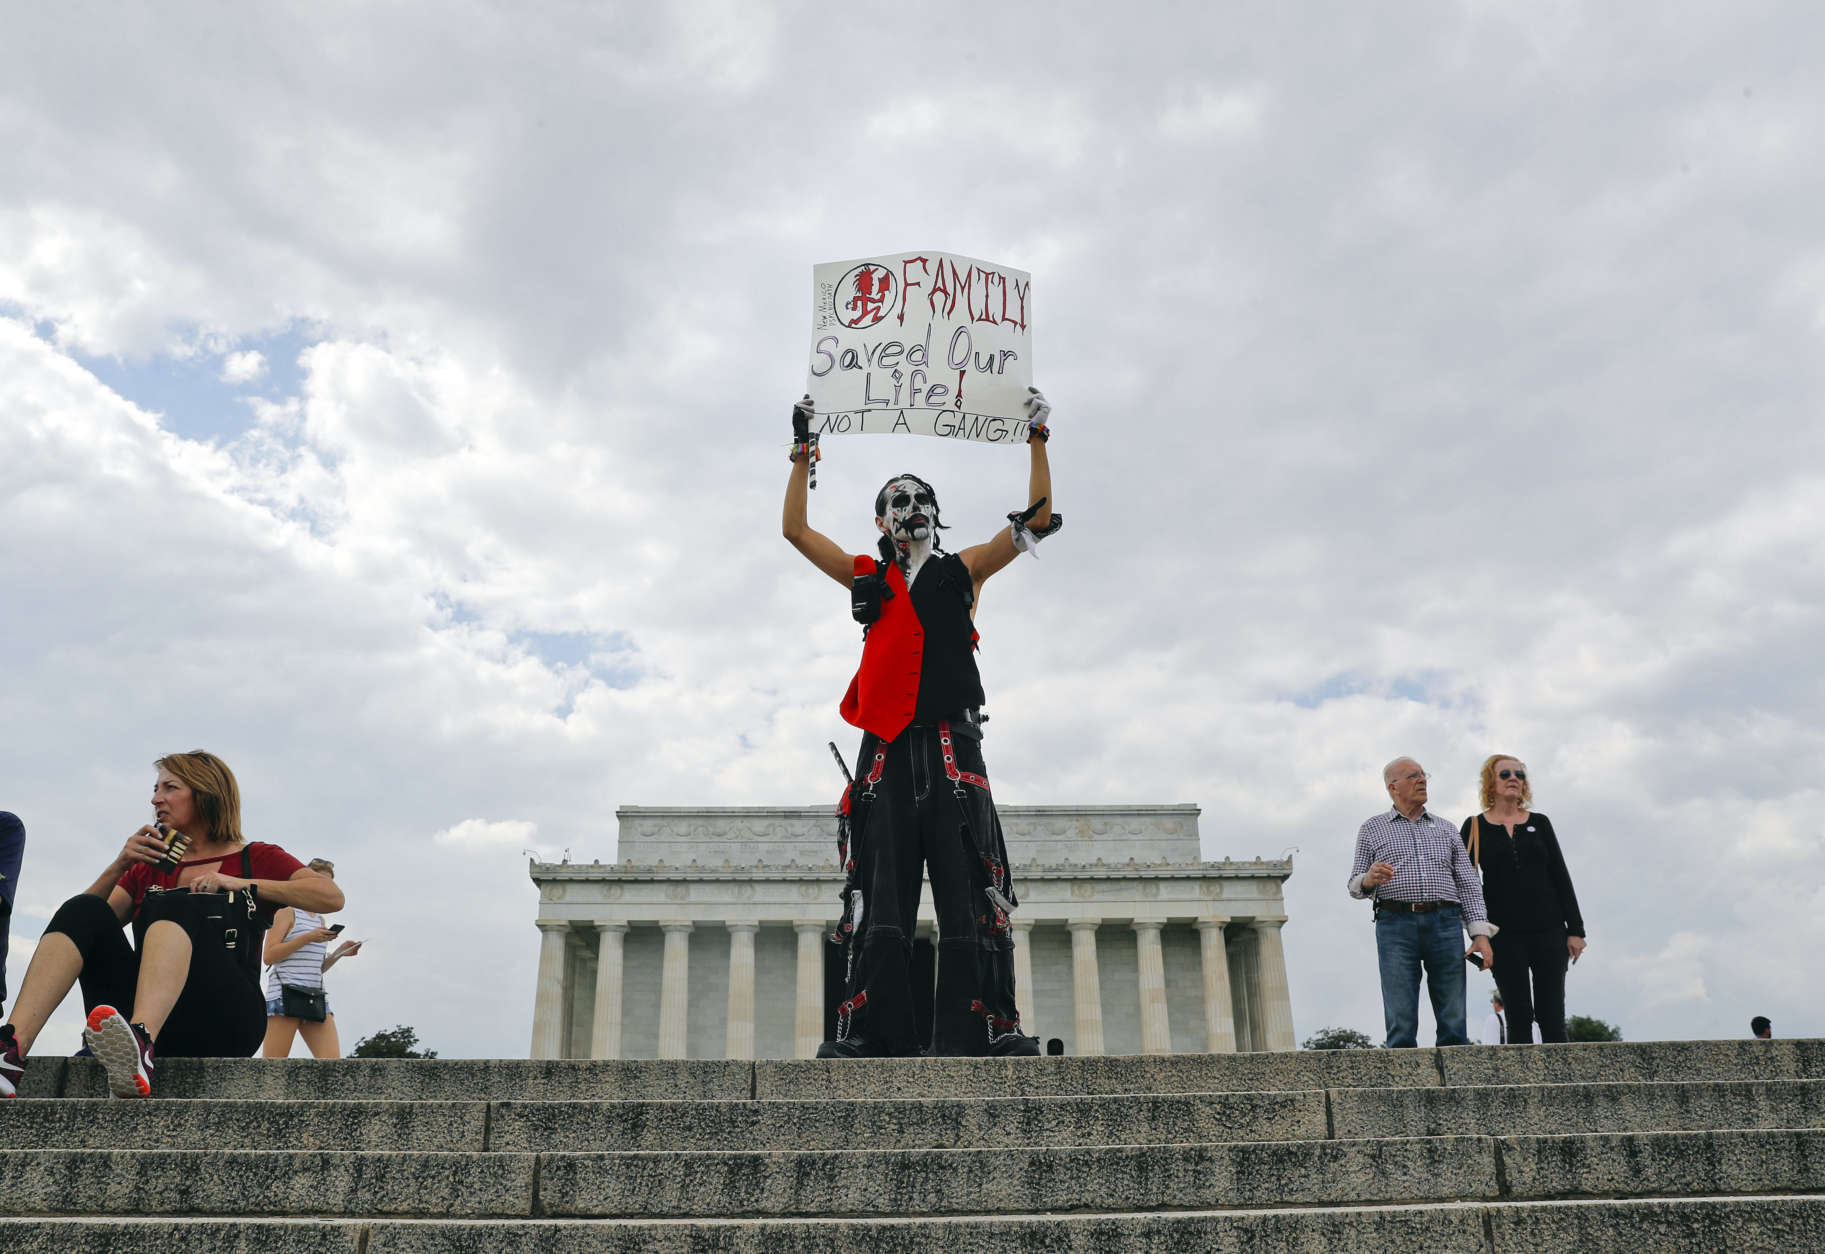 Fonz Tobin, 25, from Albuquerque, N.M., holds up a sign in front of the Lincoln Memorial in Washington, as he joins other supporters of the rap group Insane Clown Posse, during a rally, Saturday, Sept. 16, 2017, to protest and demand that the FBI rescind its classification of the juggalos as "loosely organized hybrid gang."(AP Photo/Pablo Martinez Monsivais)